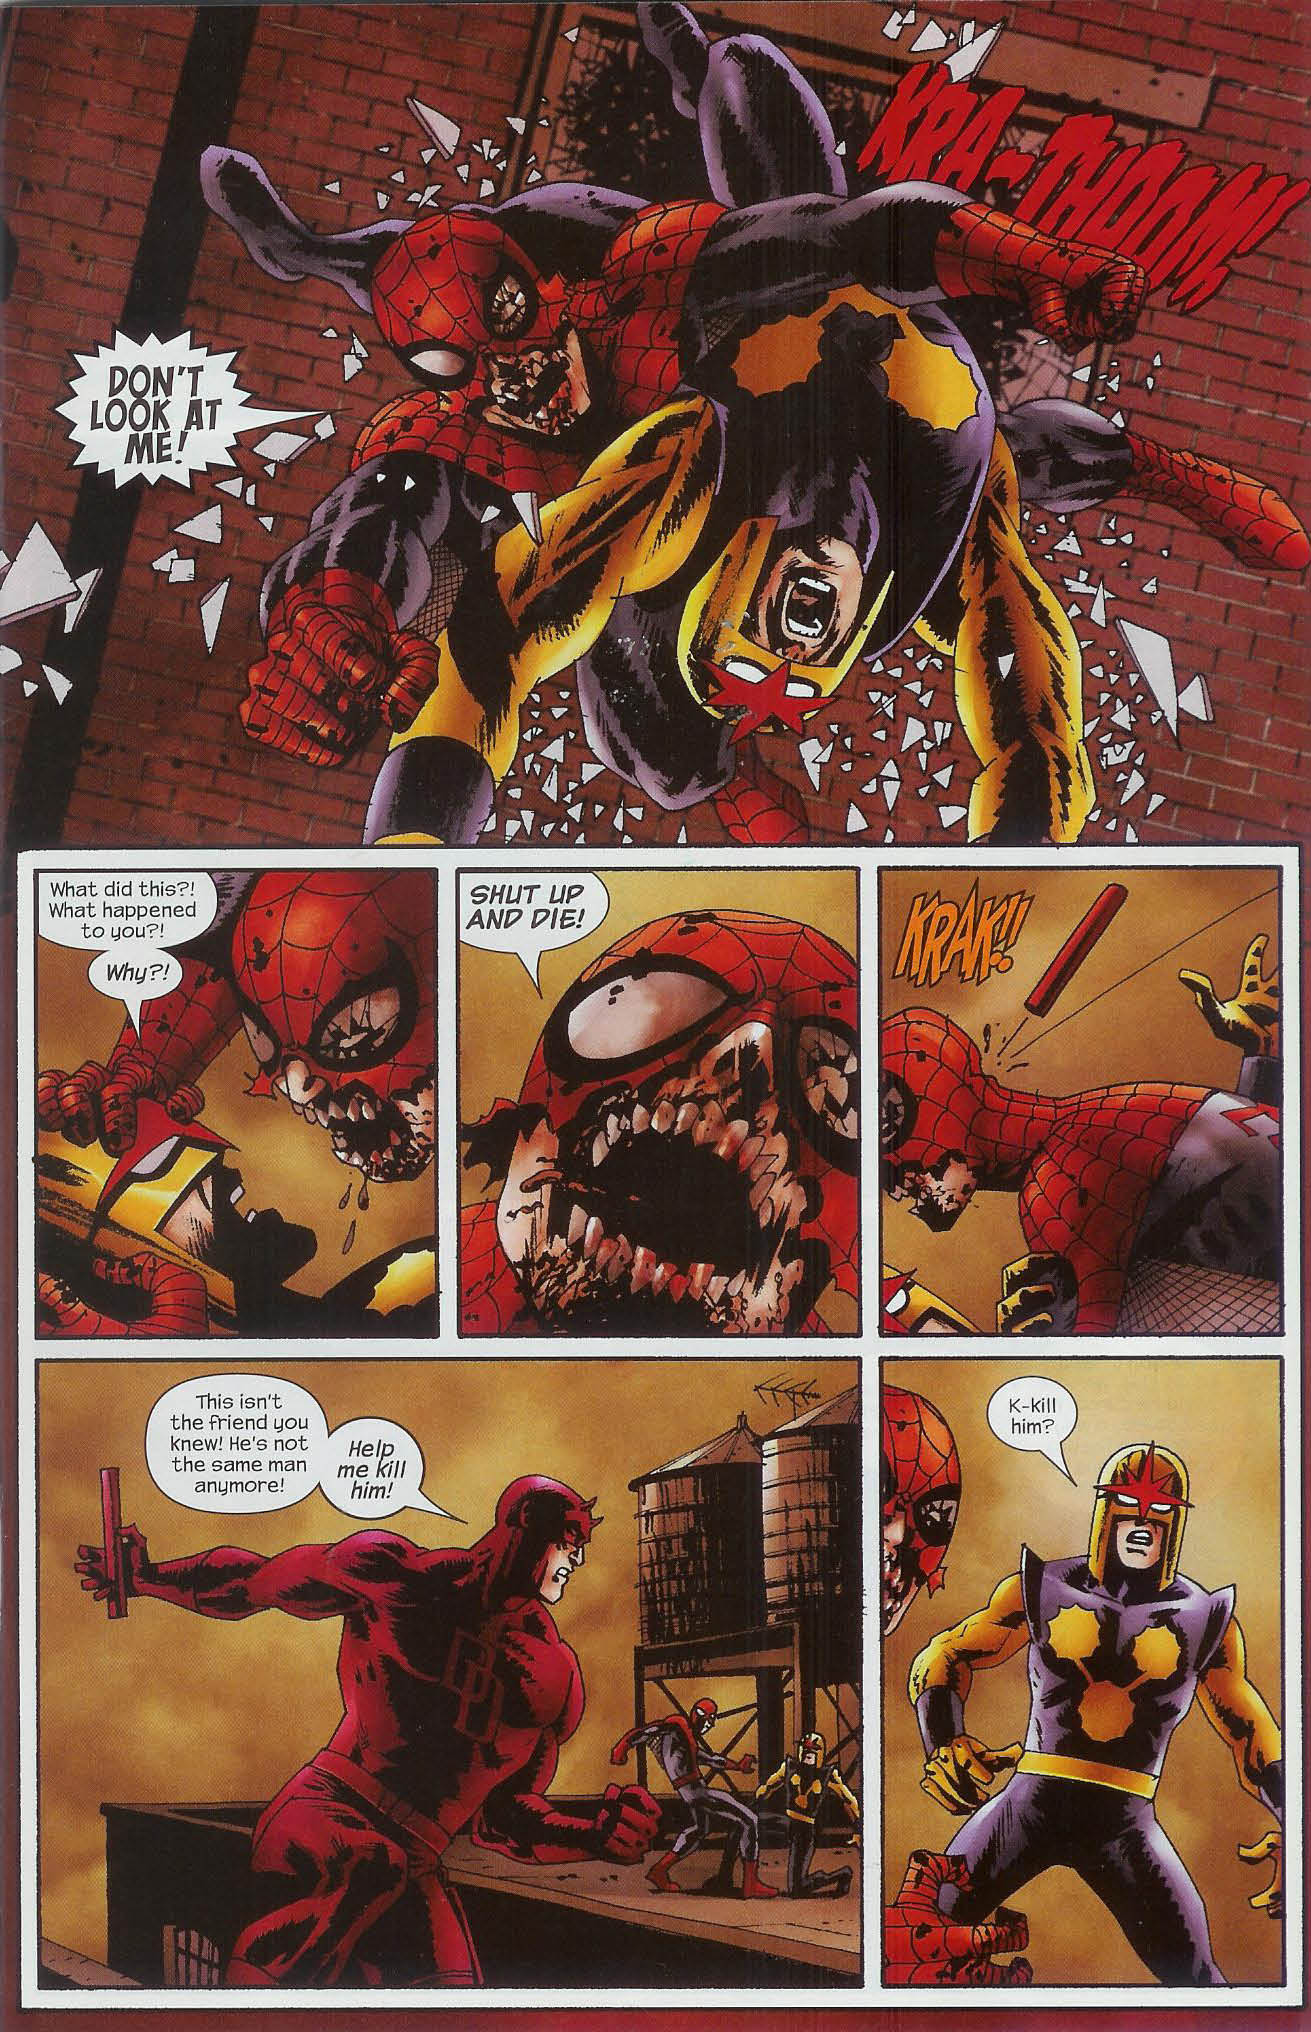 Marvel Zombies: Dead Days #11